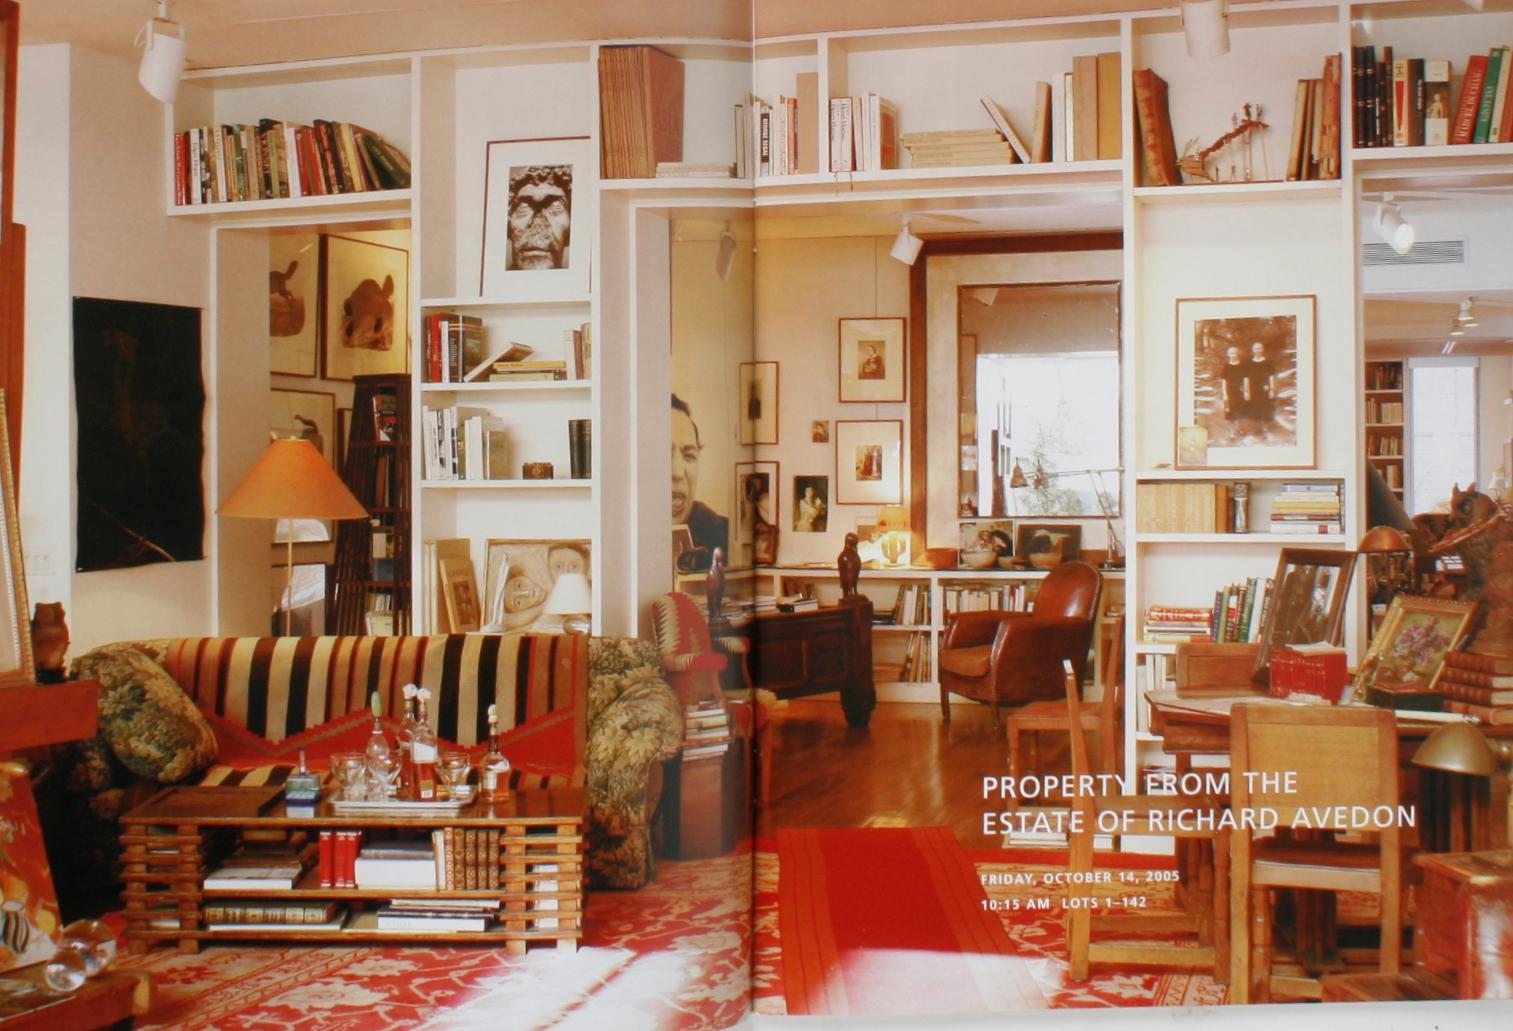 American Sotheby's: Property from the Estate of Richard Avedon, Sale #8091, October 2005